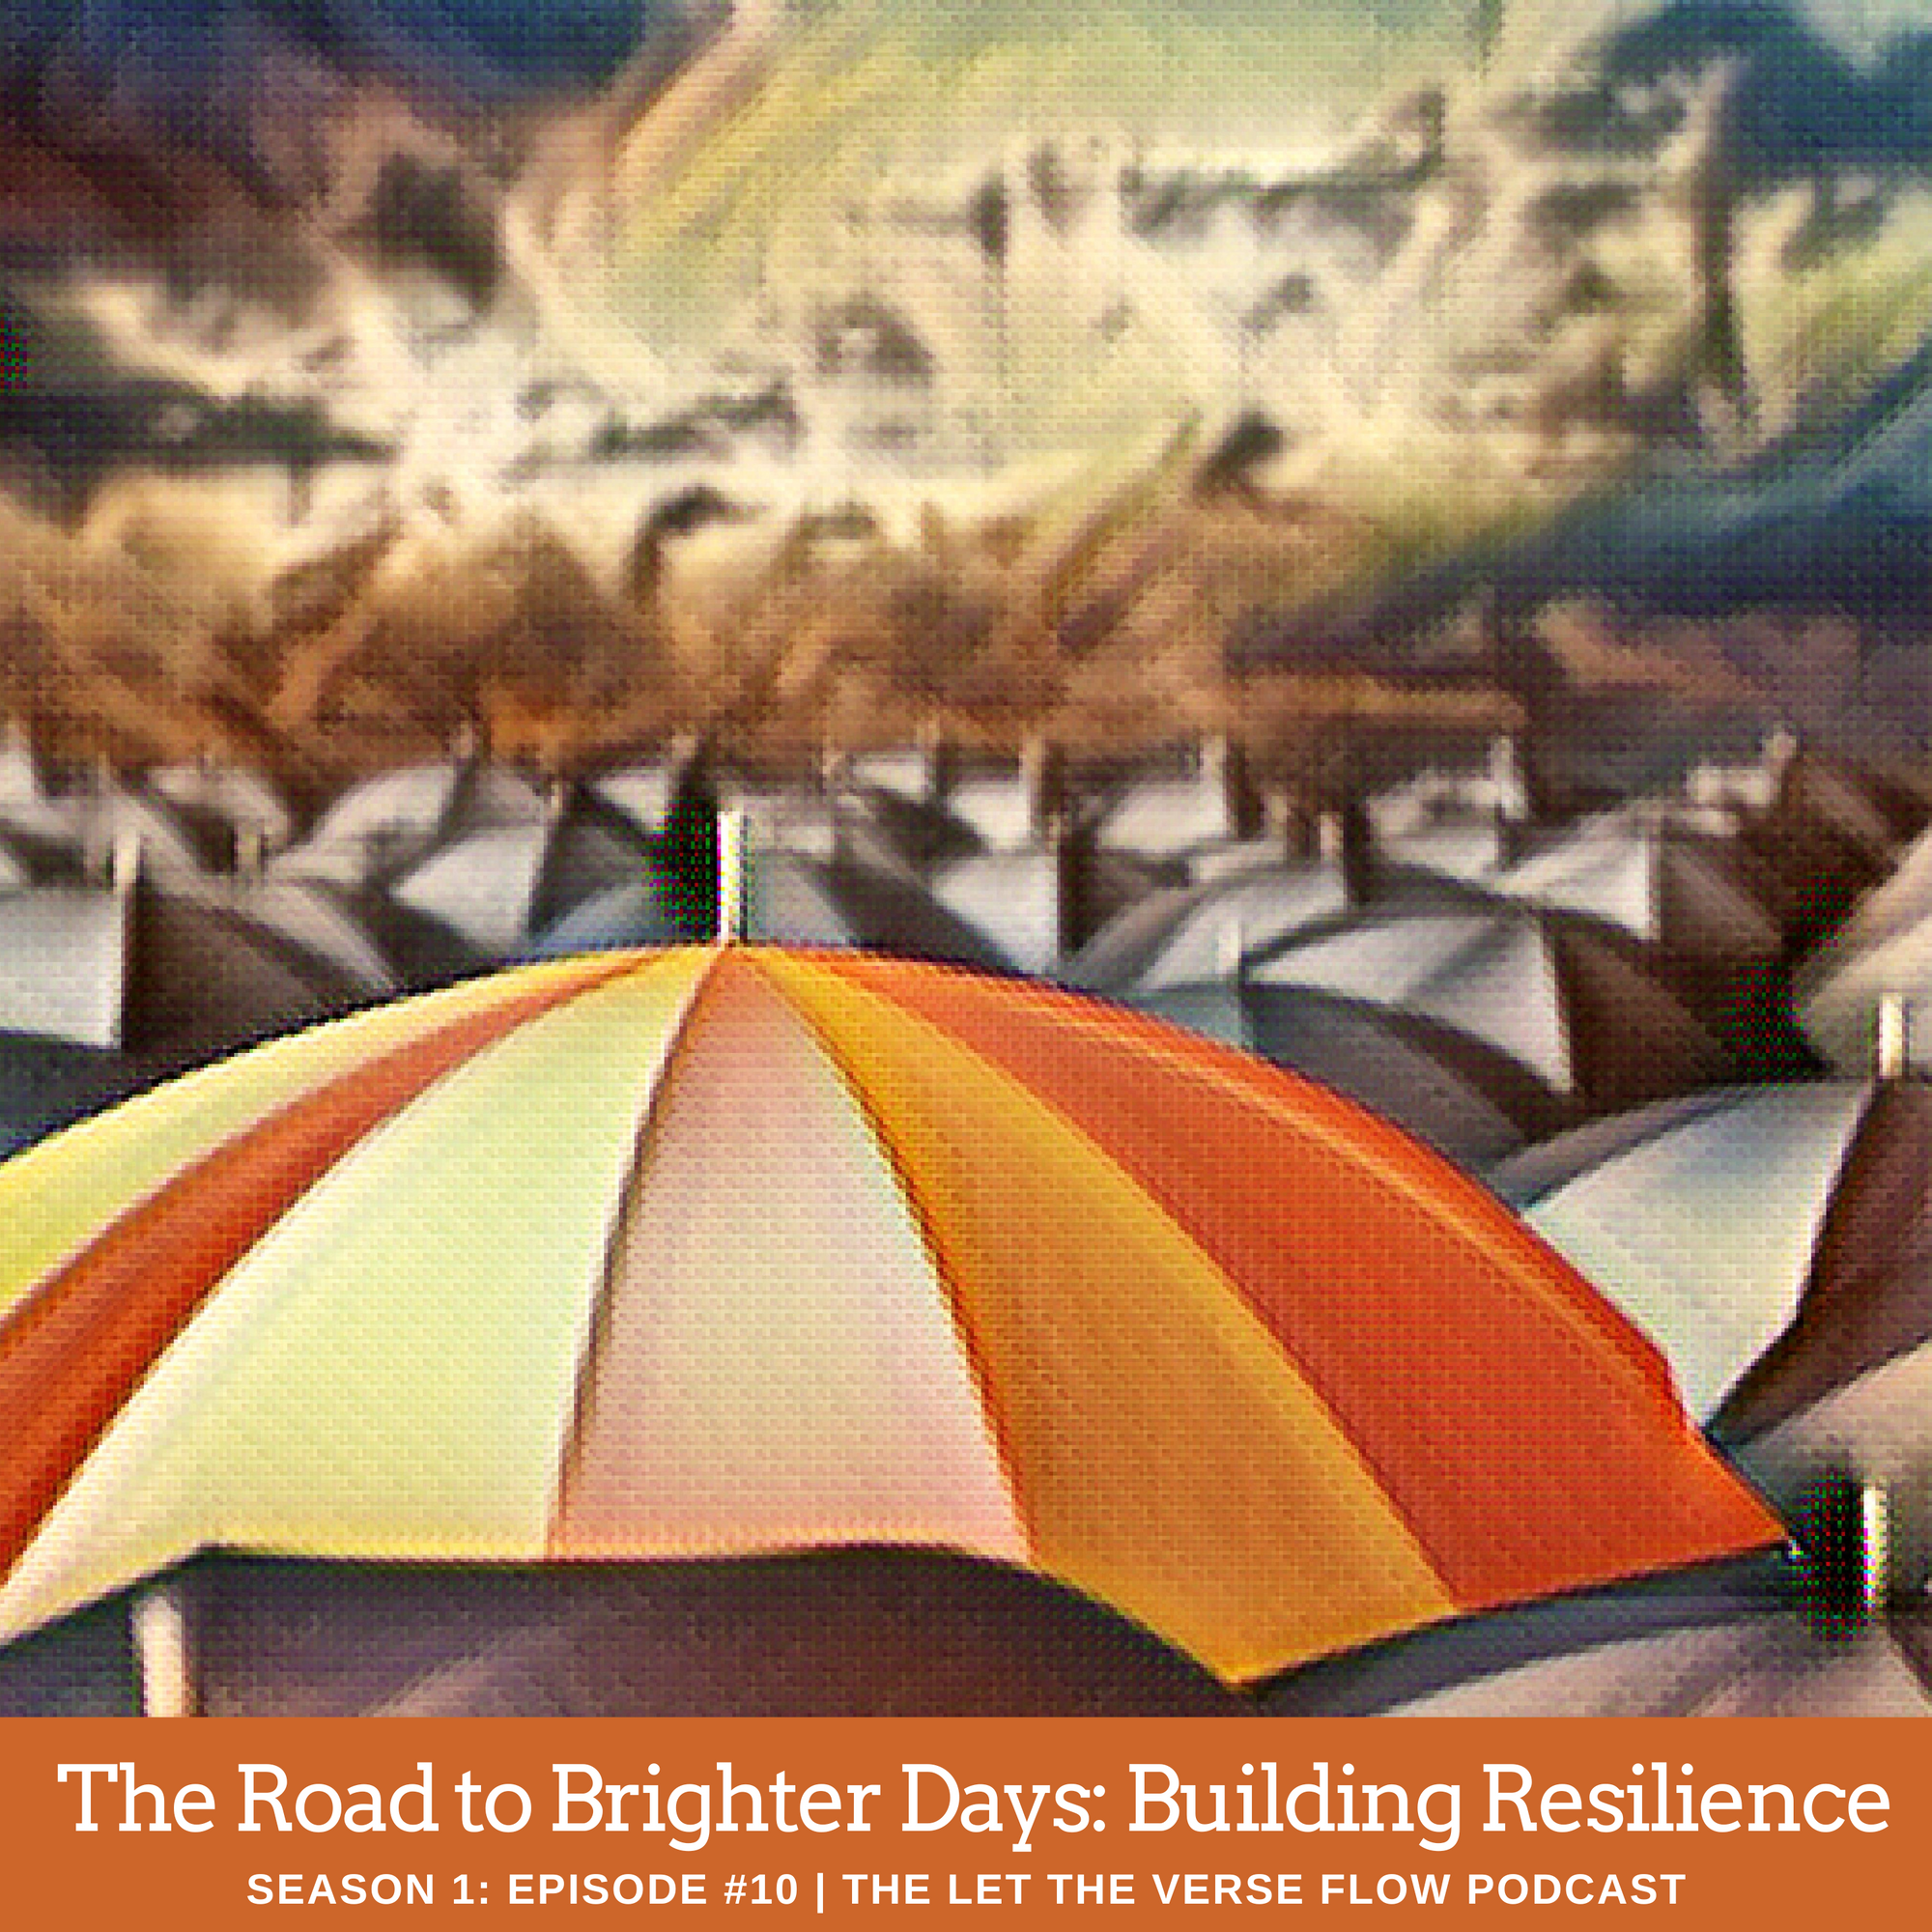 A picture of many umbrellas with a colorful orange one in the foreground; the text reads "The Road to Brighter Days: Building Resilience Season 1: Episode #10 The Let the Verse Flow Podcast"